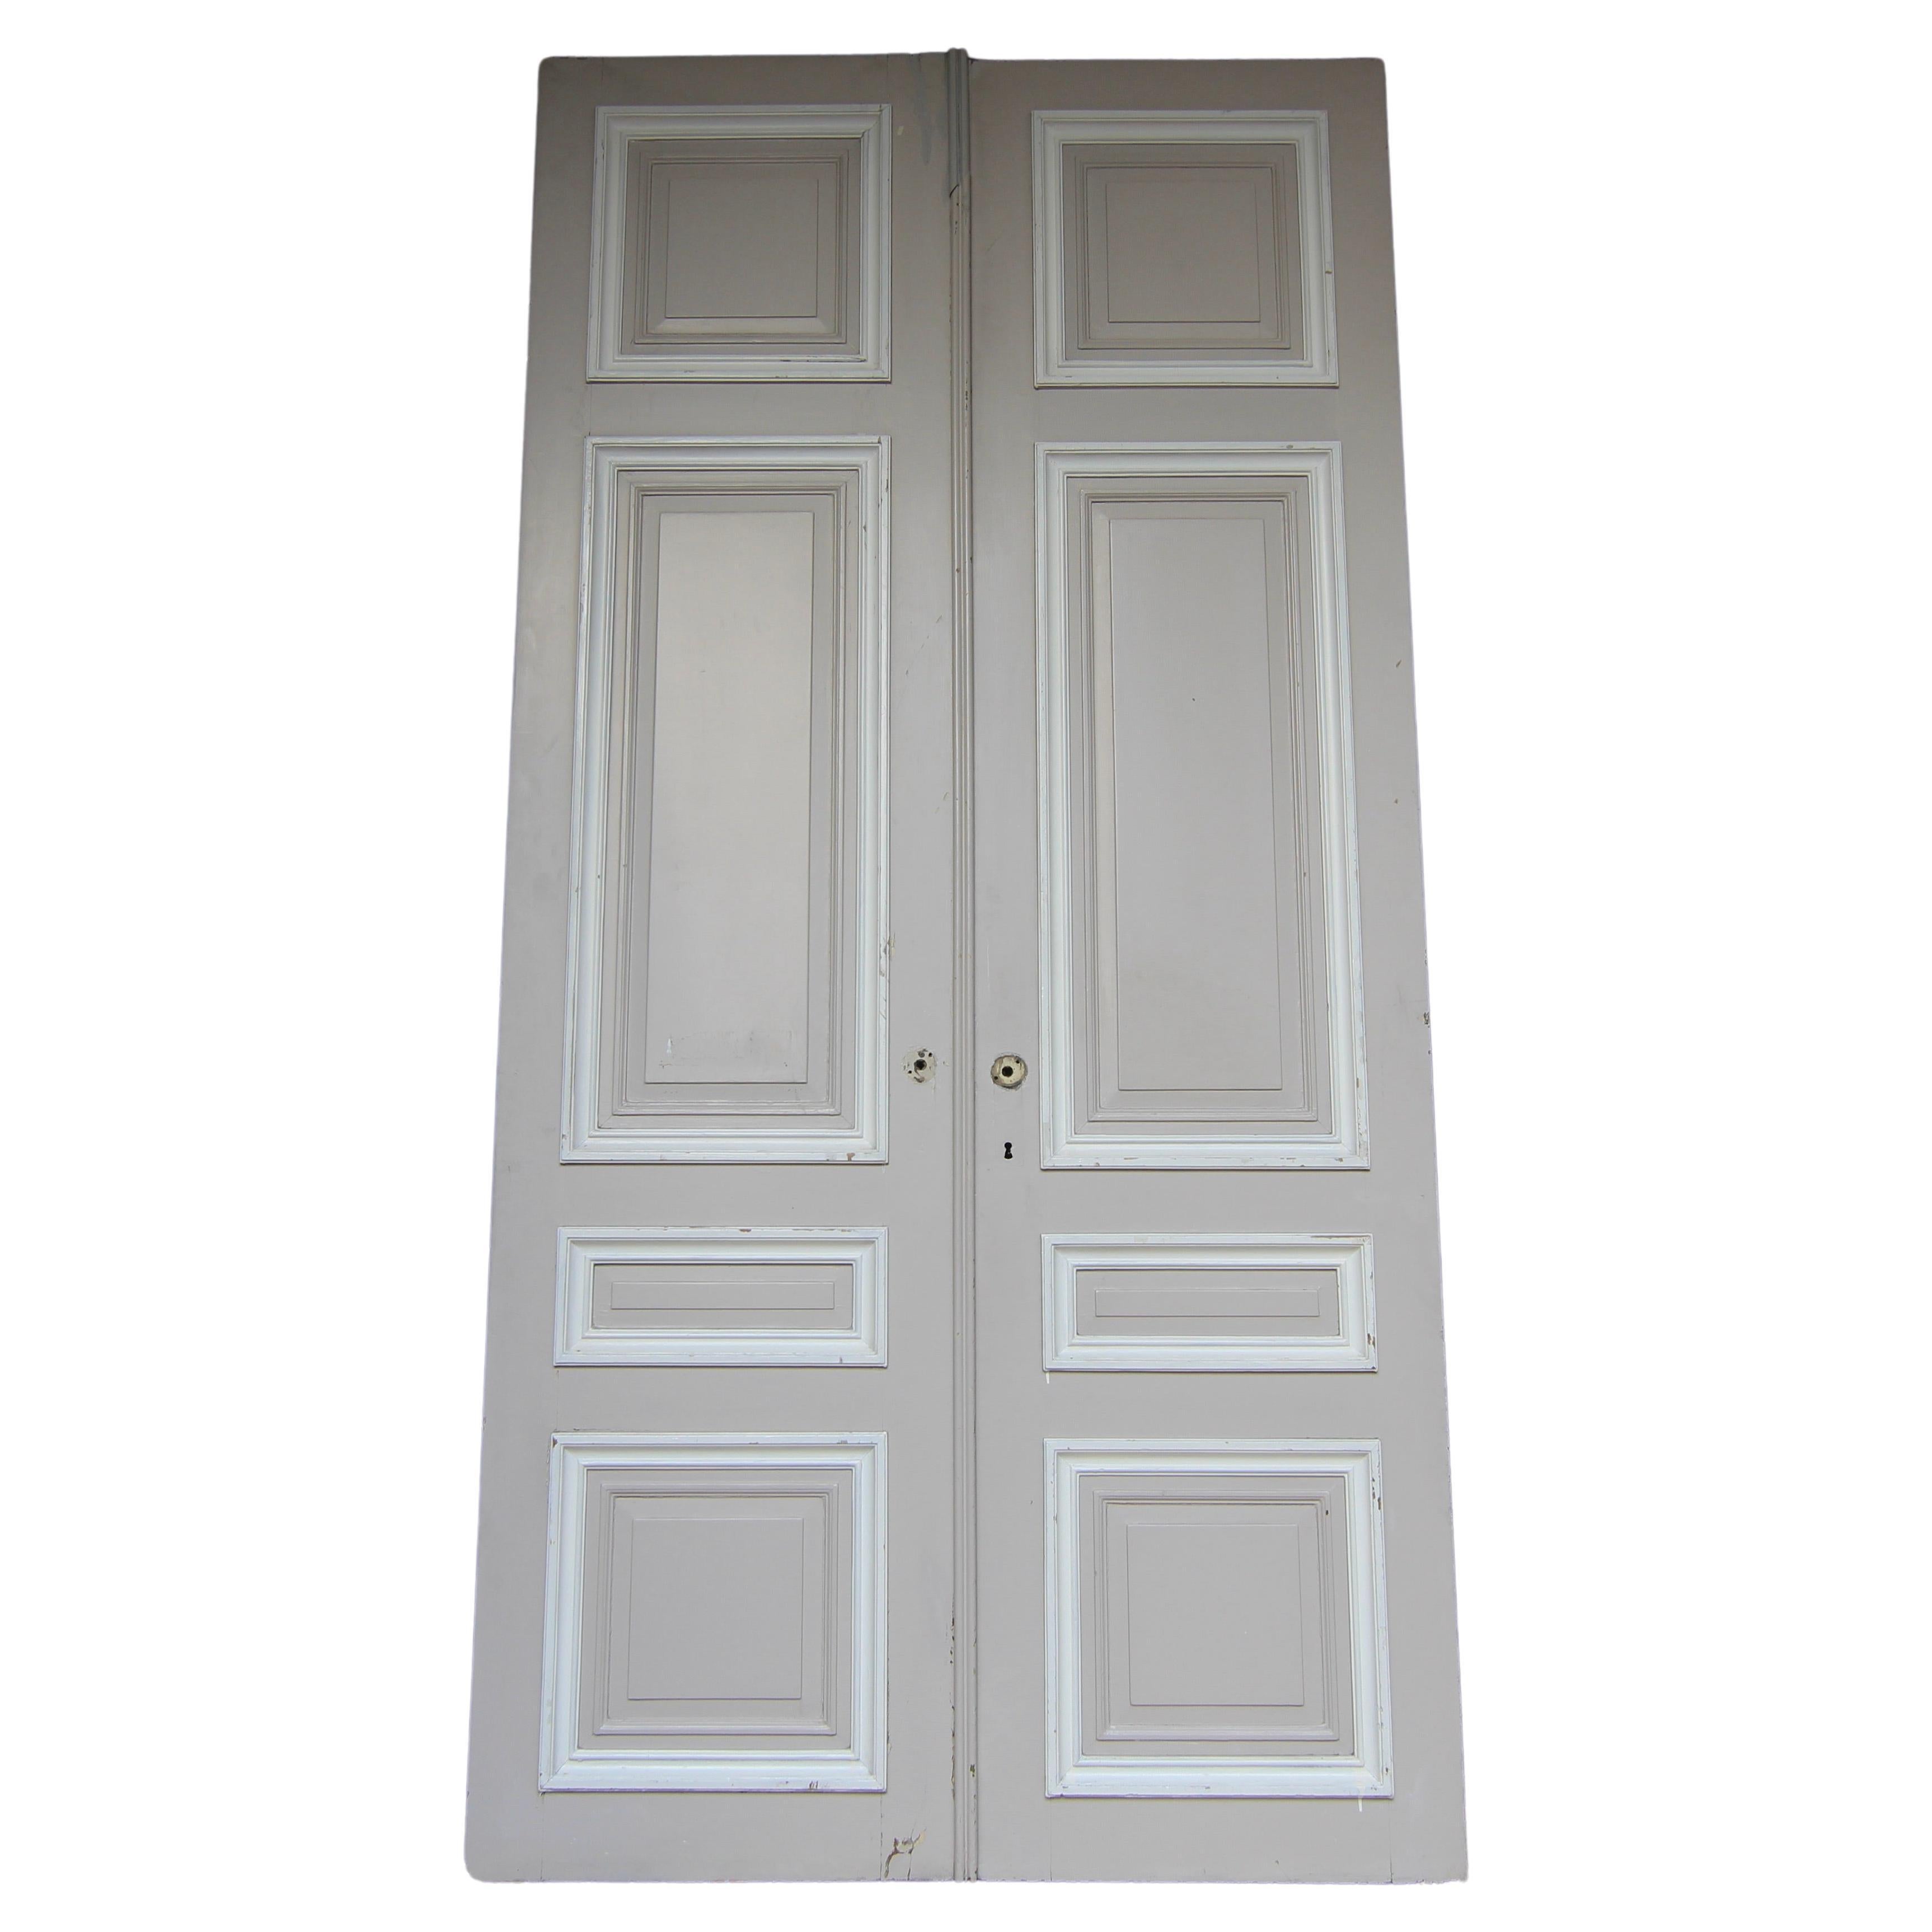 Early 20th Century French Painted Oak Double Door For Sale